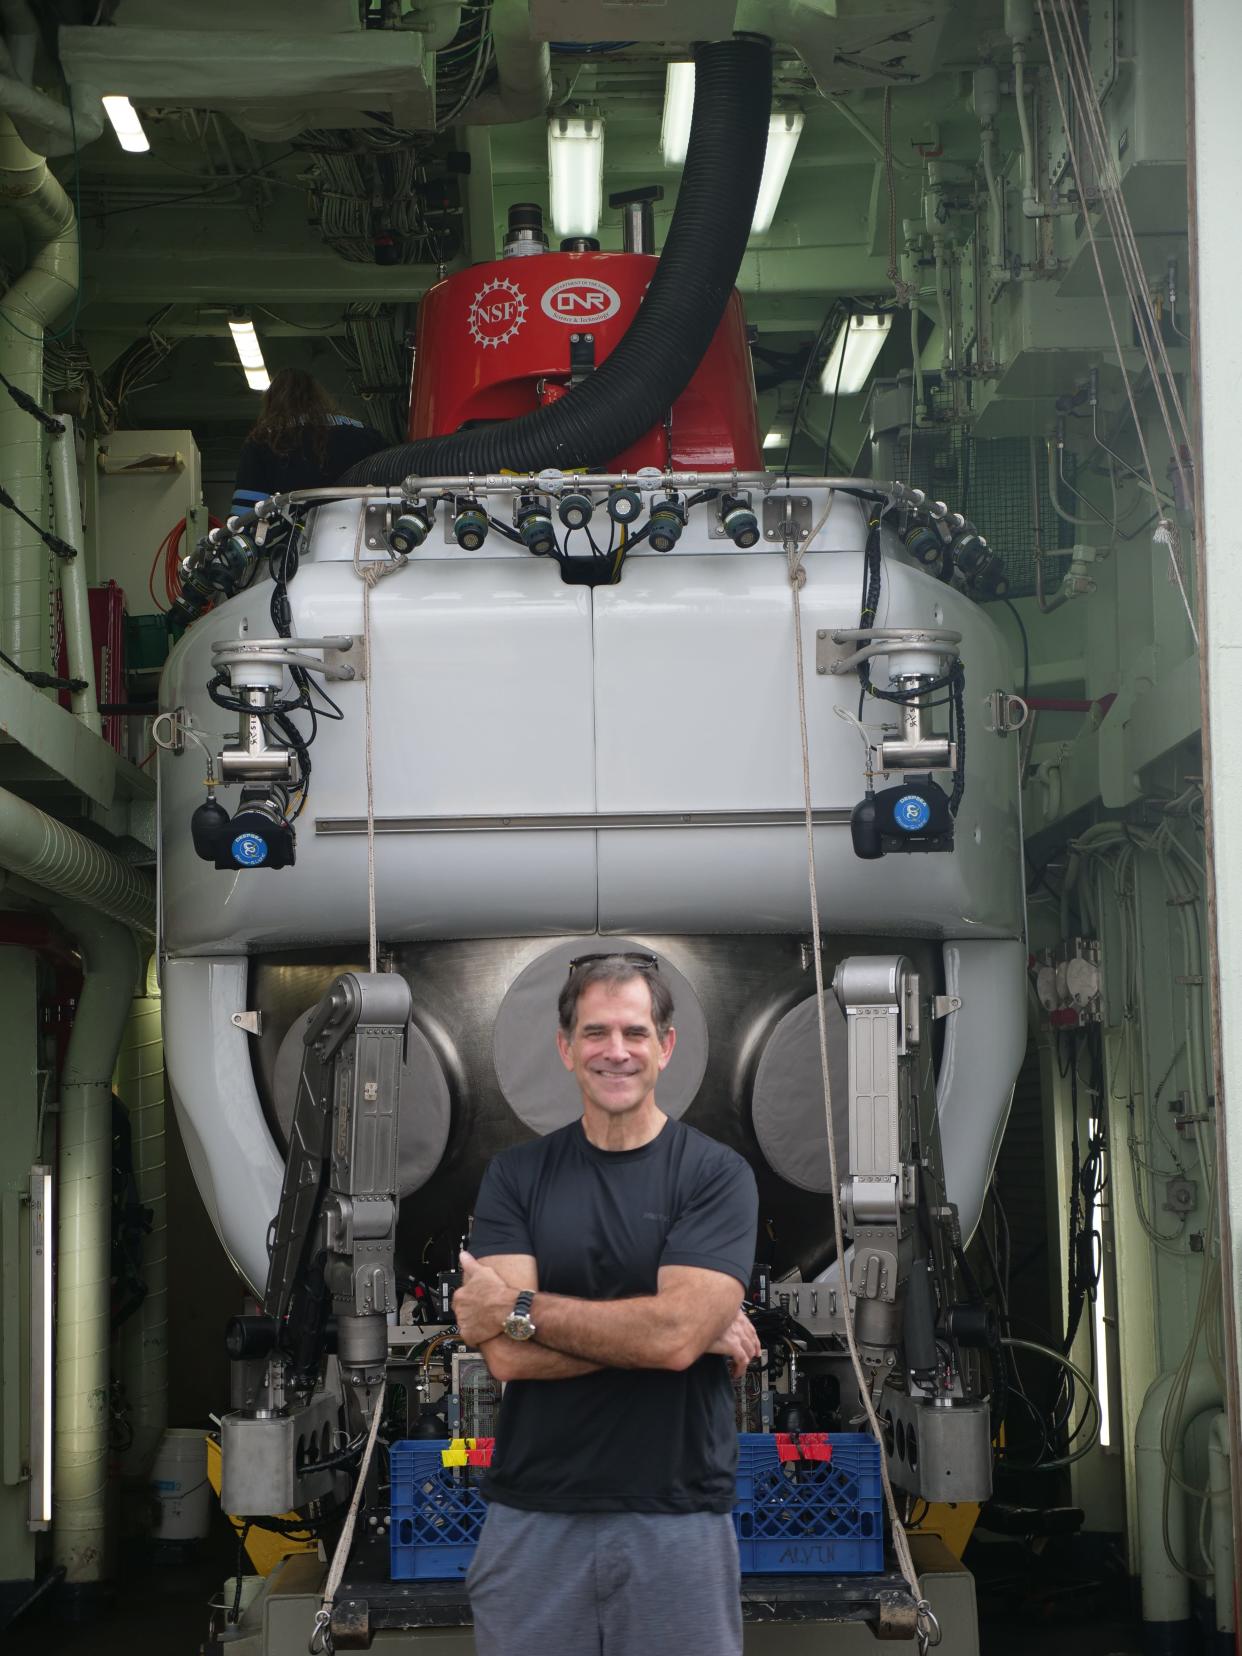 Falmouth resident Bruce Strickrott, lead pilot for the Woods Hole Oceanographic Institution's submersible Alvin, stands in front of the submersible during a research cruise in 2022.